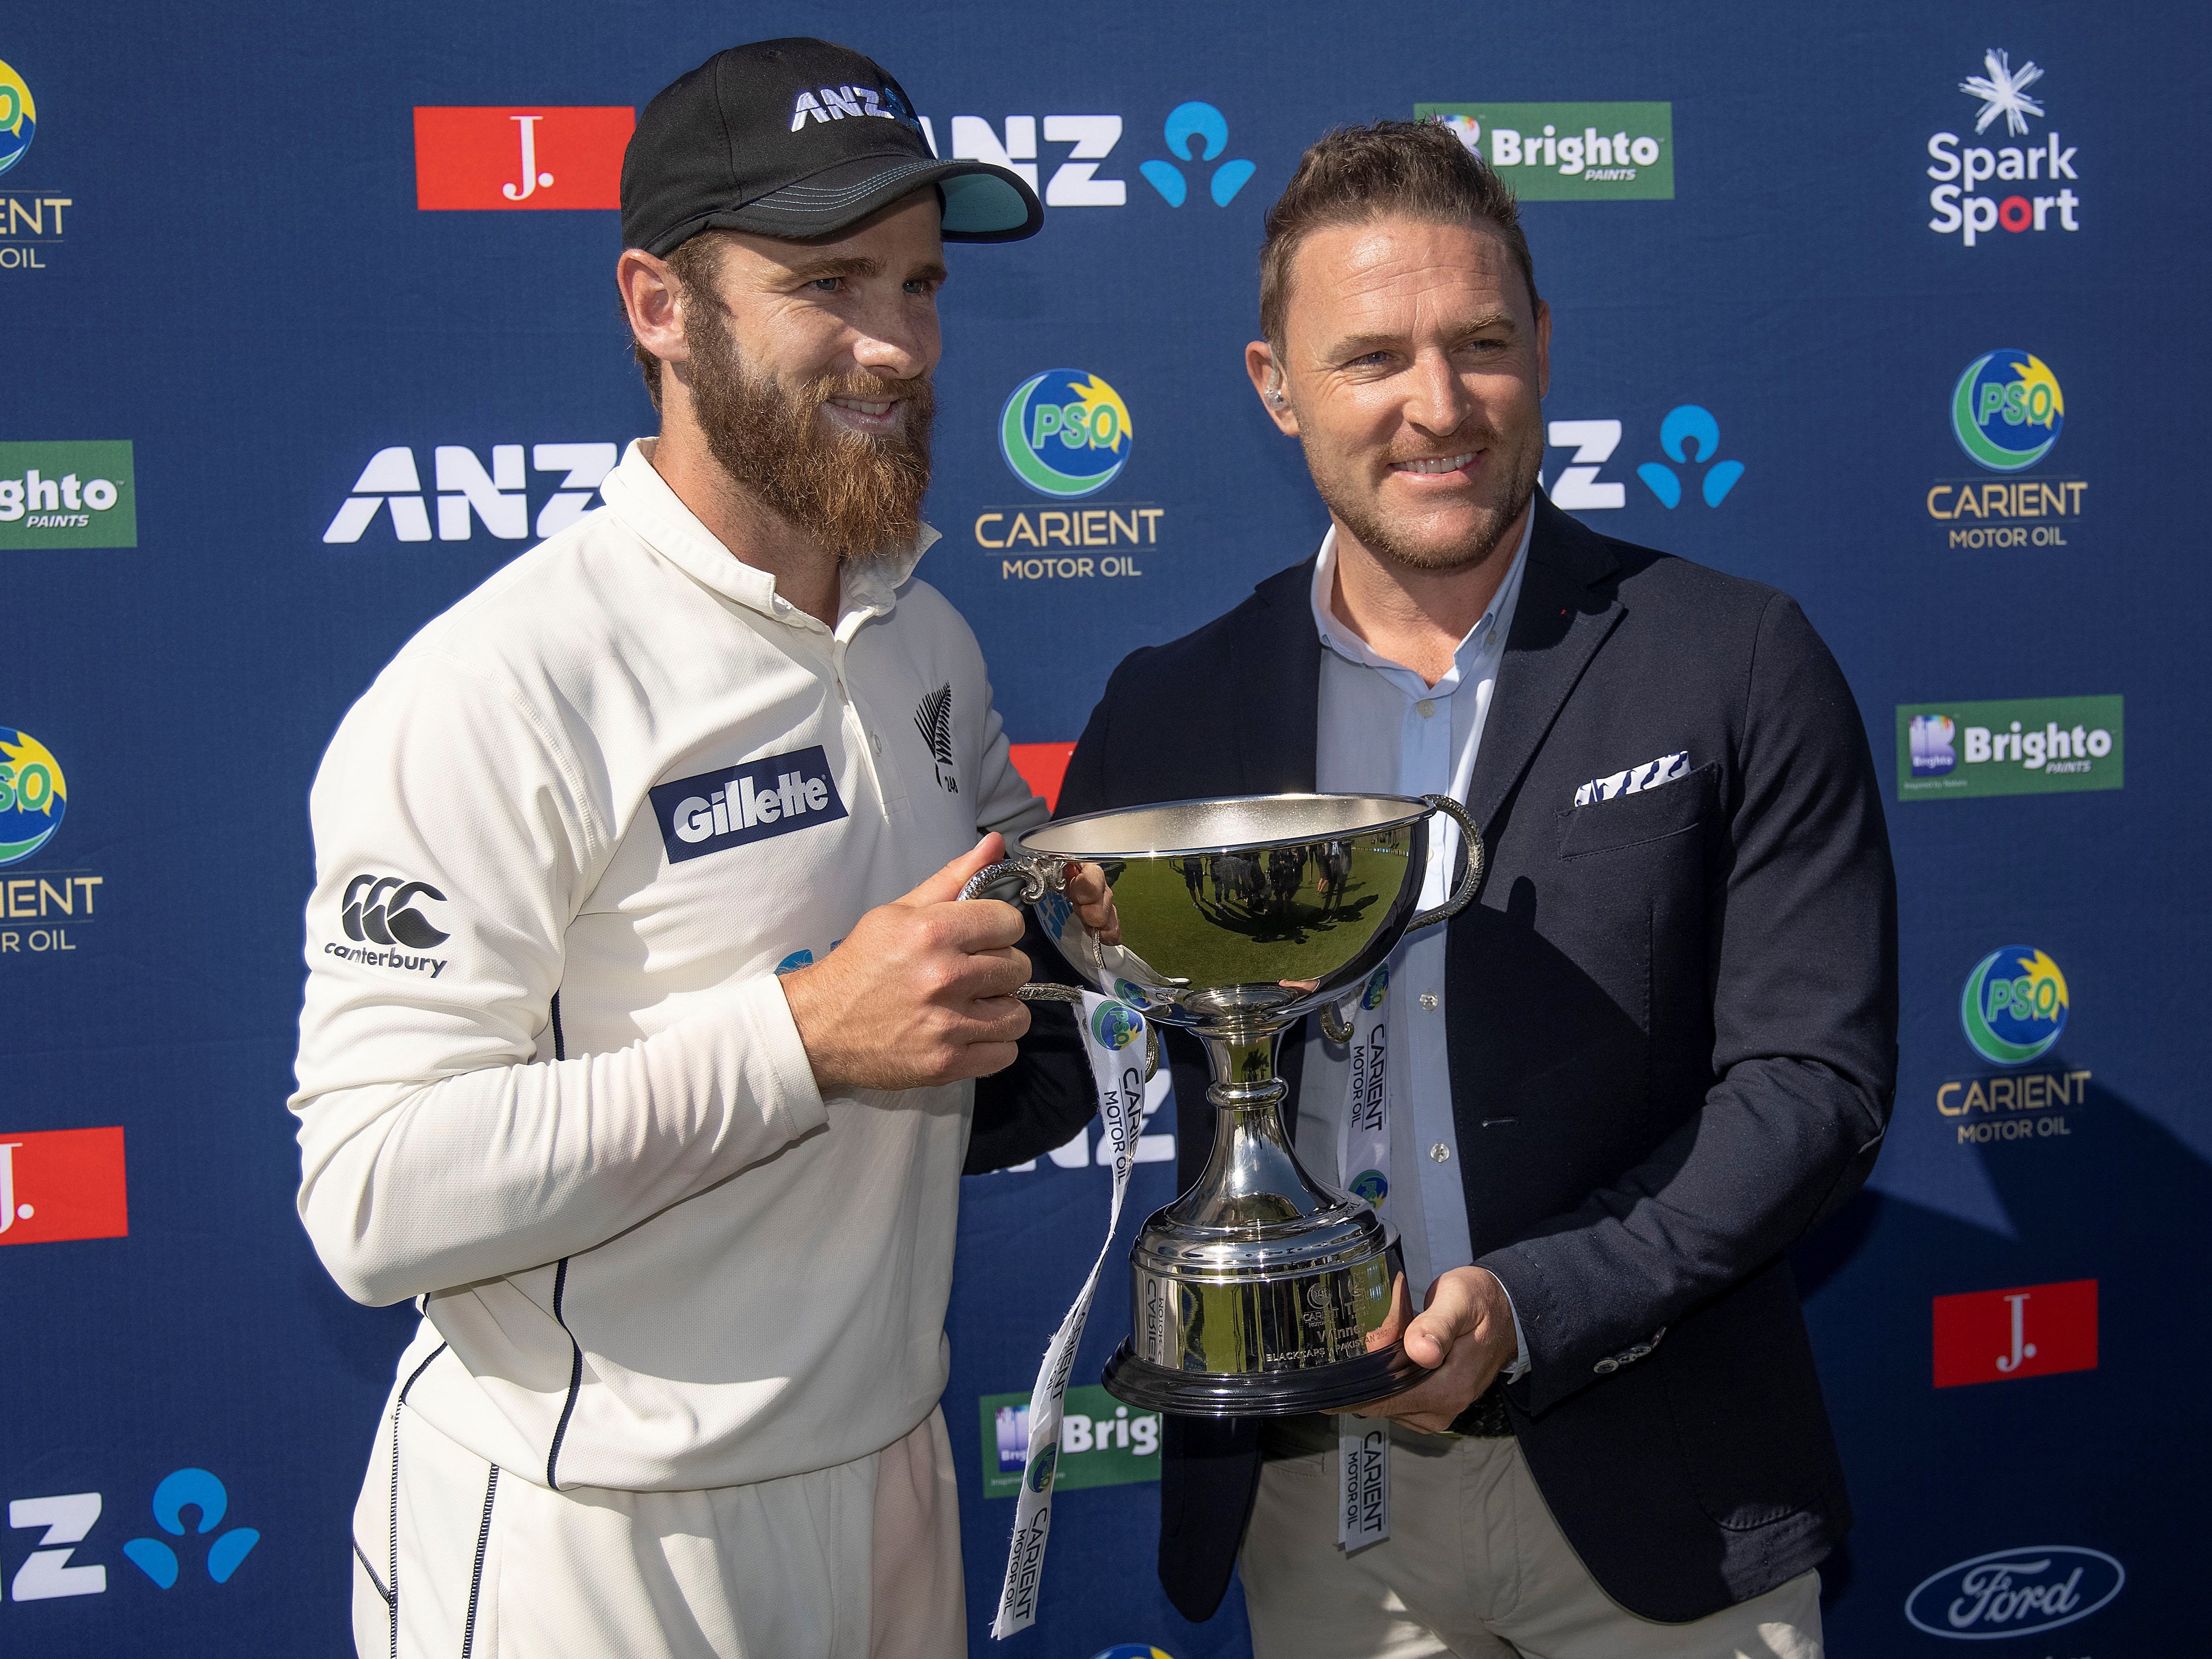 Brendon McCullum presents Kane Williamson with the ANZ test series trophy